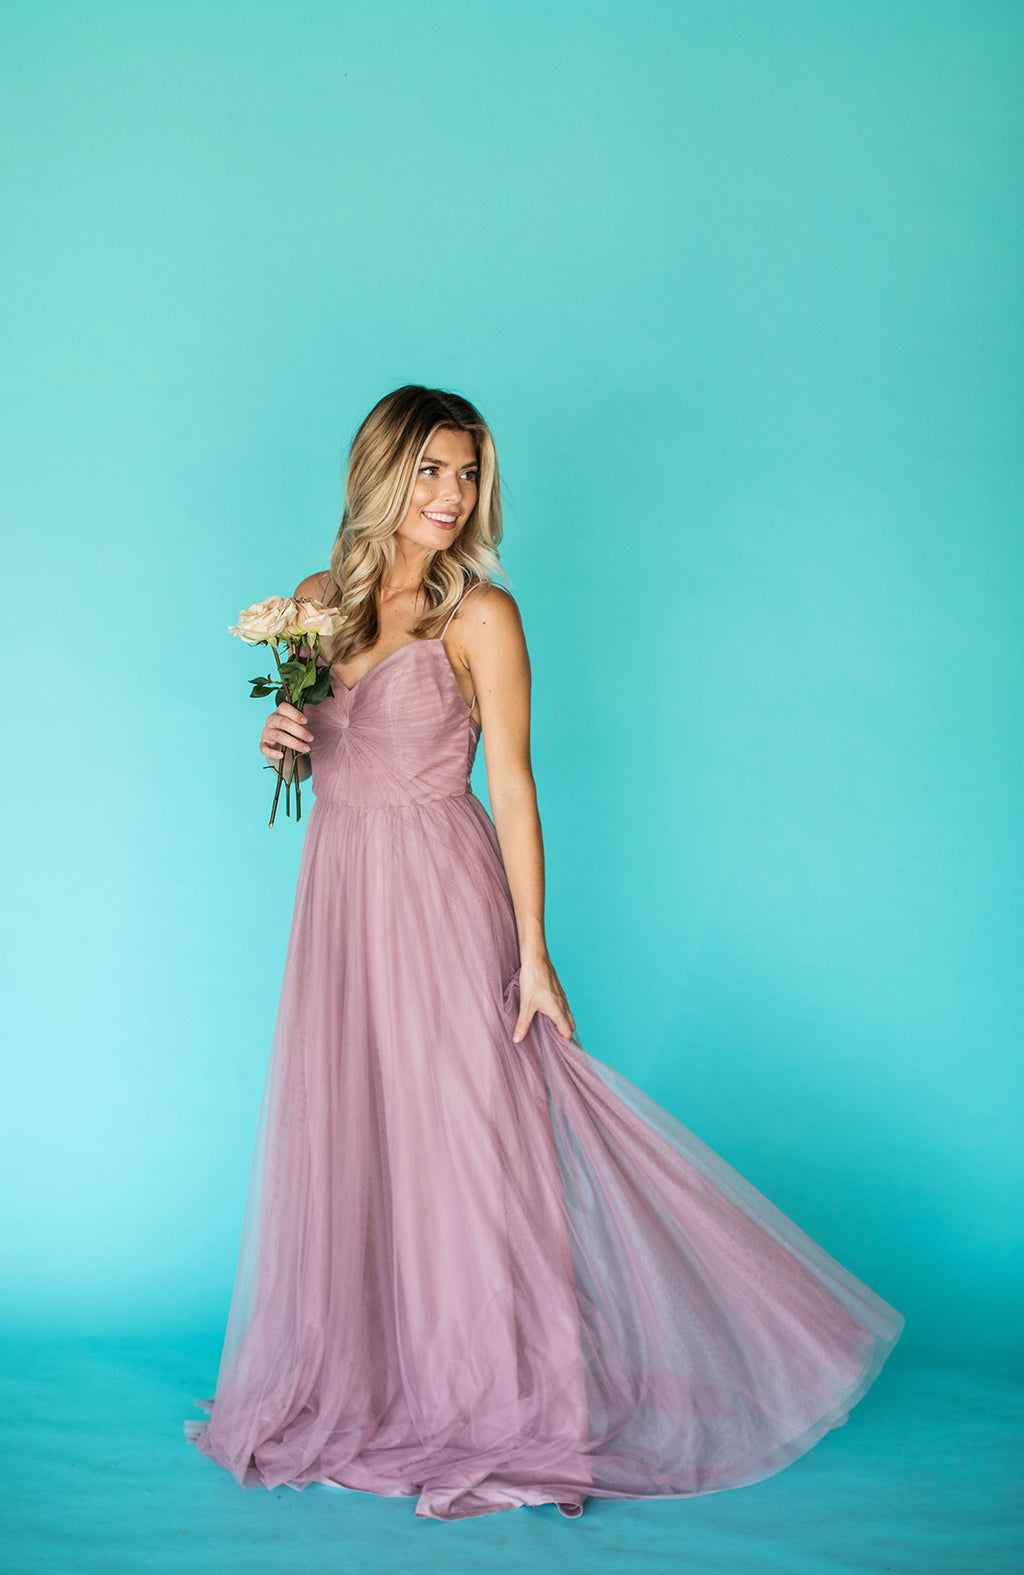 rental dresses for photography sessions: Sadie in Slate Blue